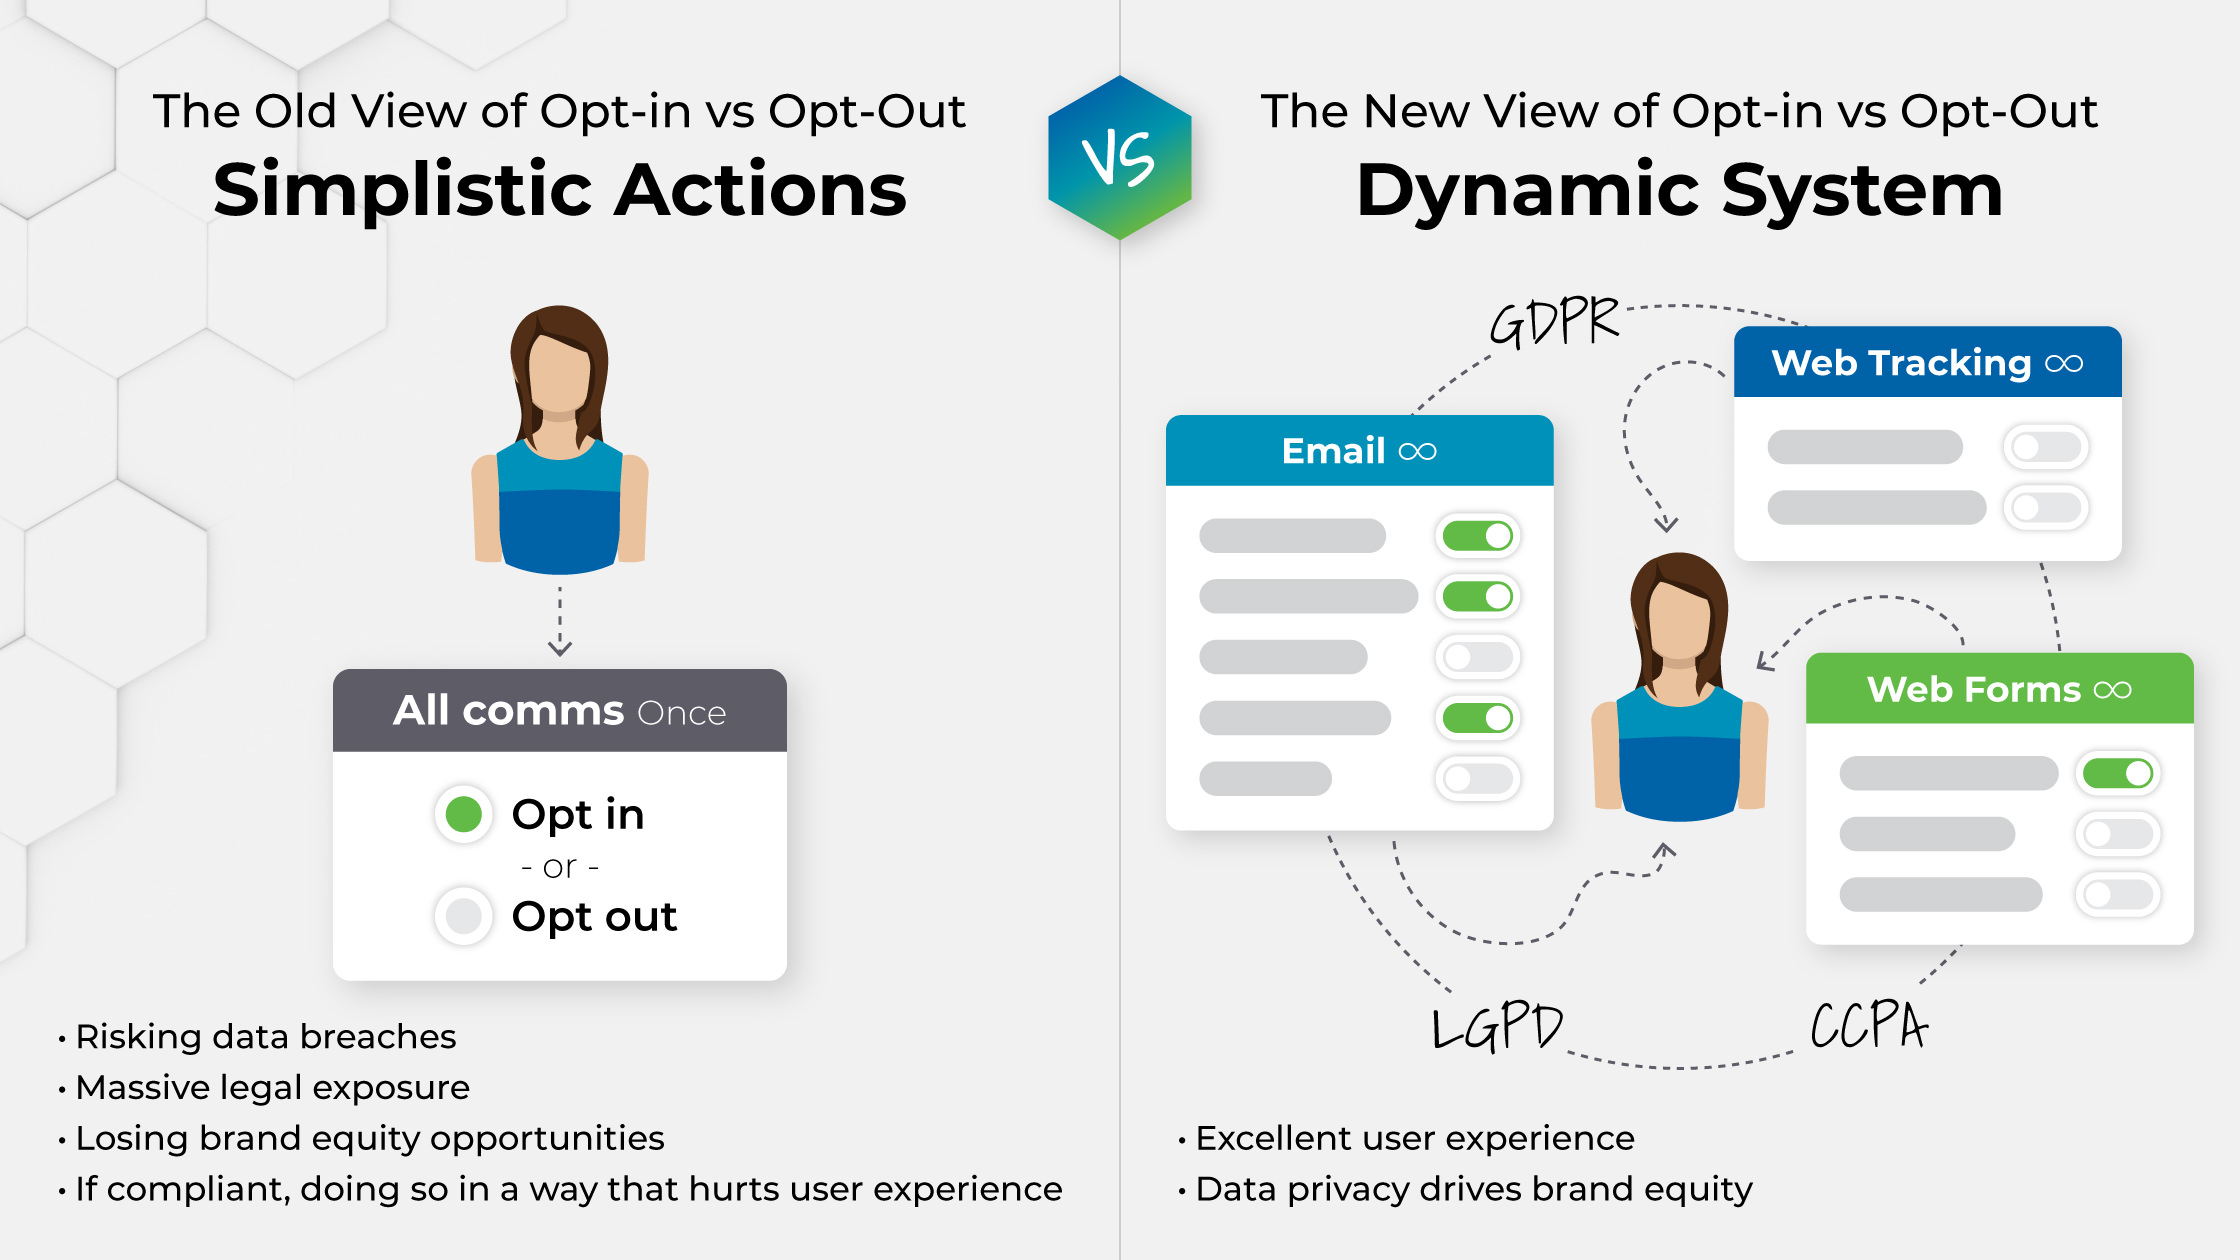 The old view of opt-in vs opt-out: simplistic actions VS The new view: dynamic system